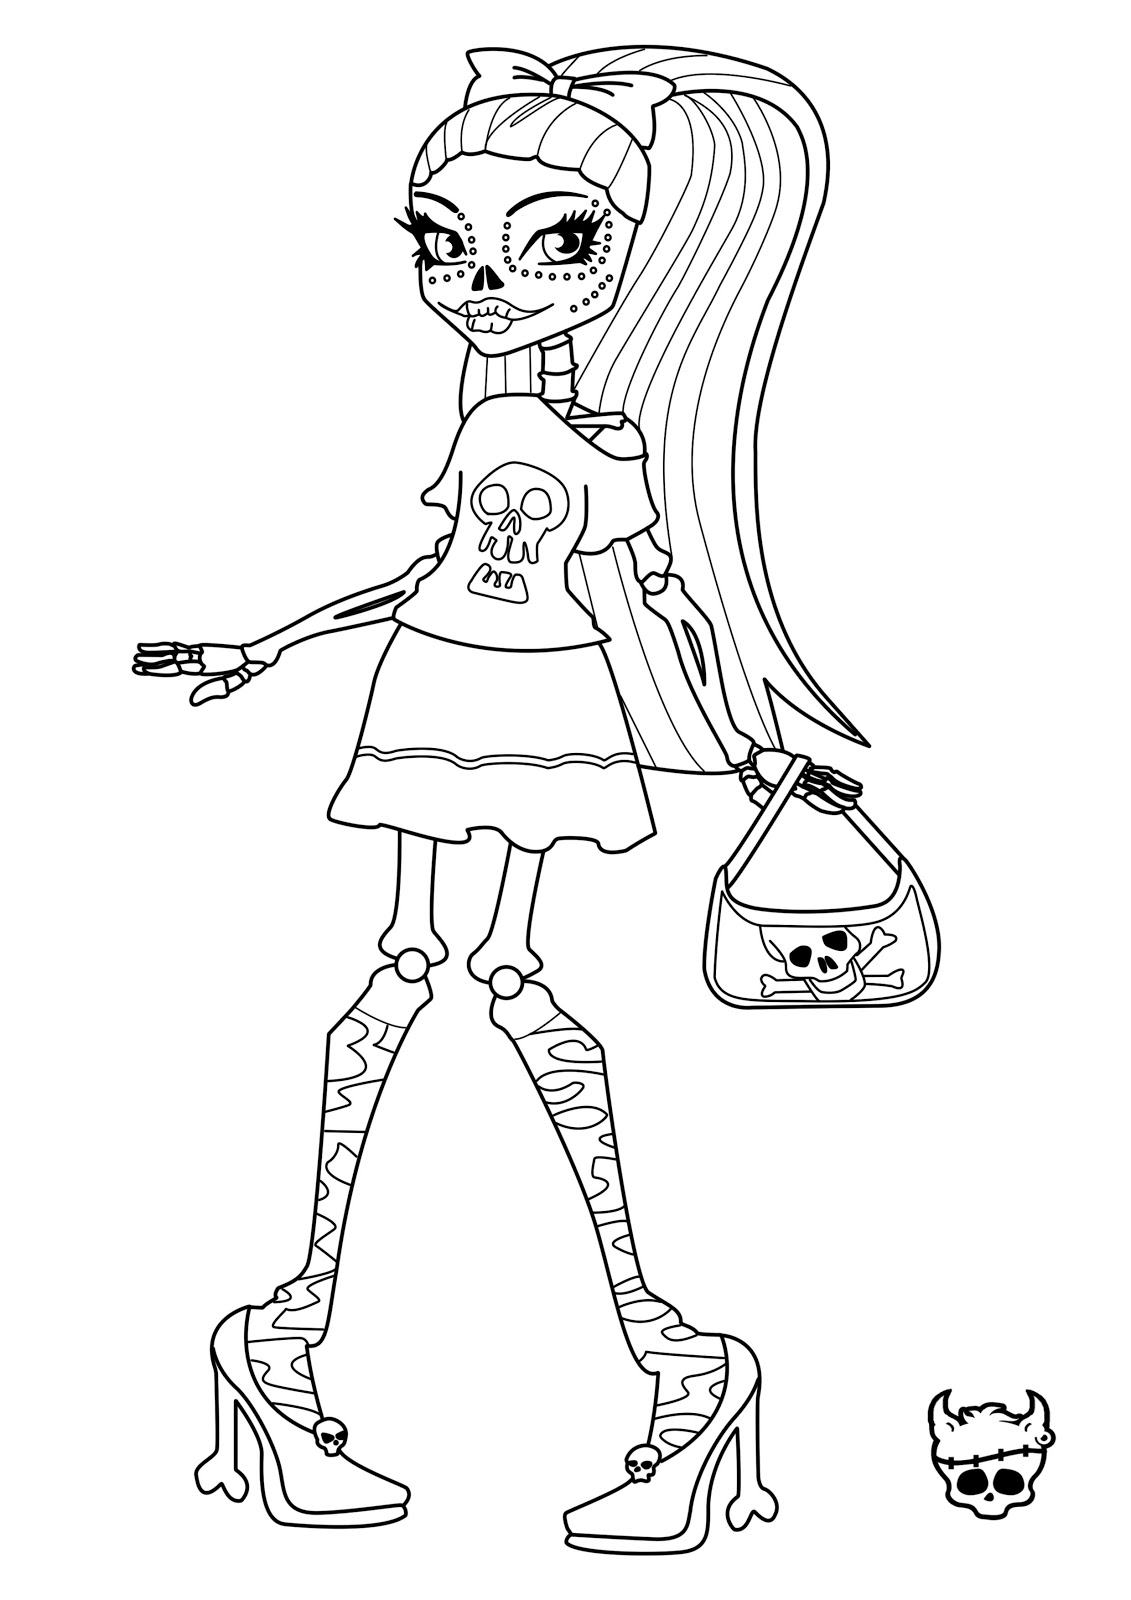  Monster high coloring pages | Coloring pages for girls | #1